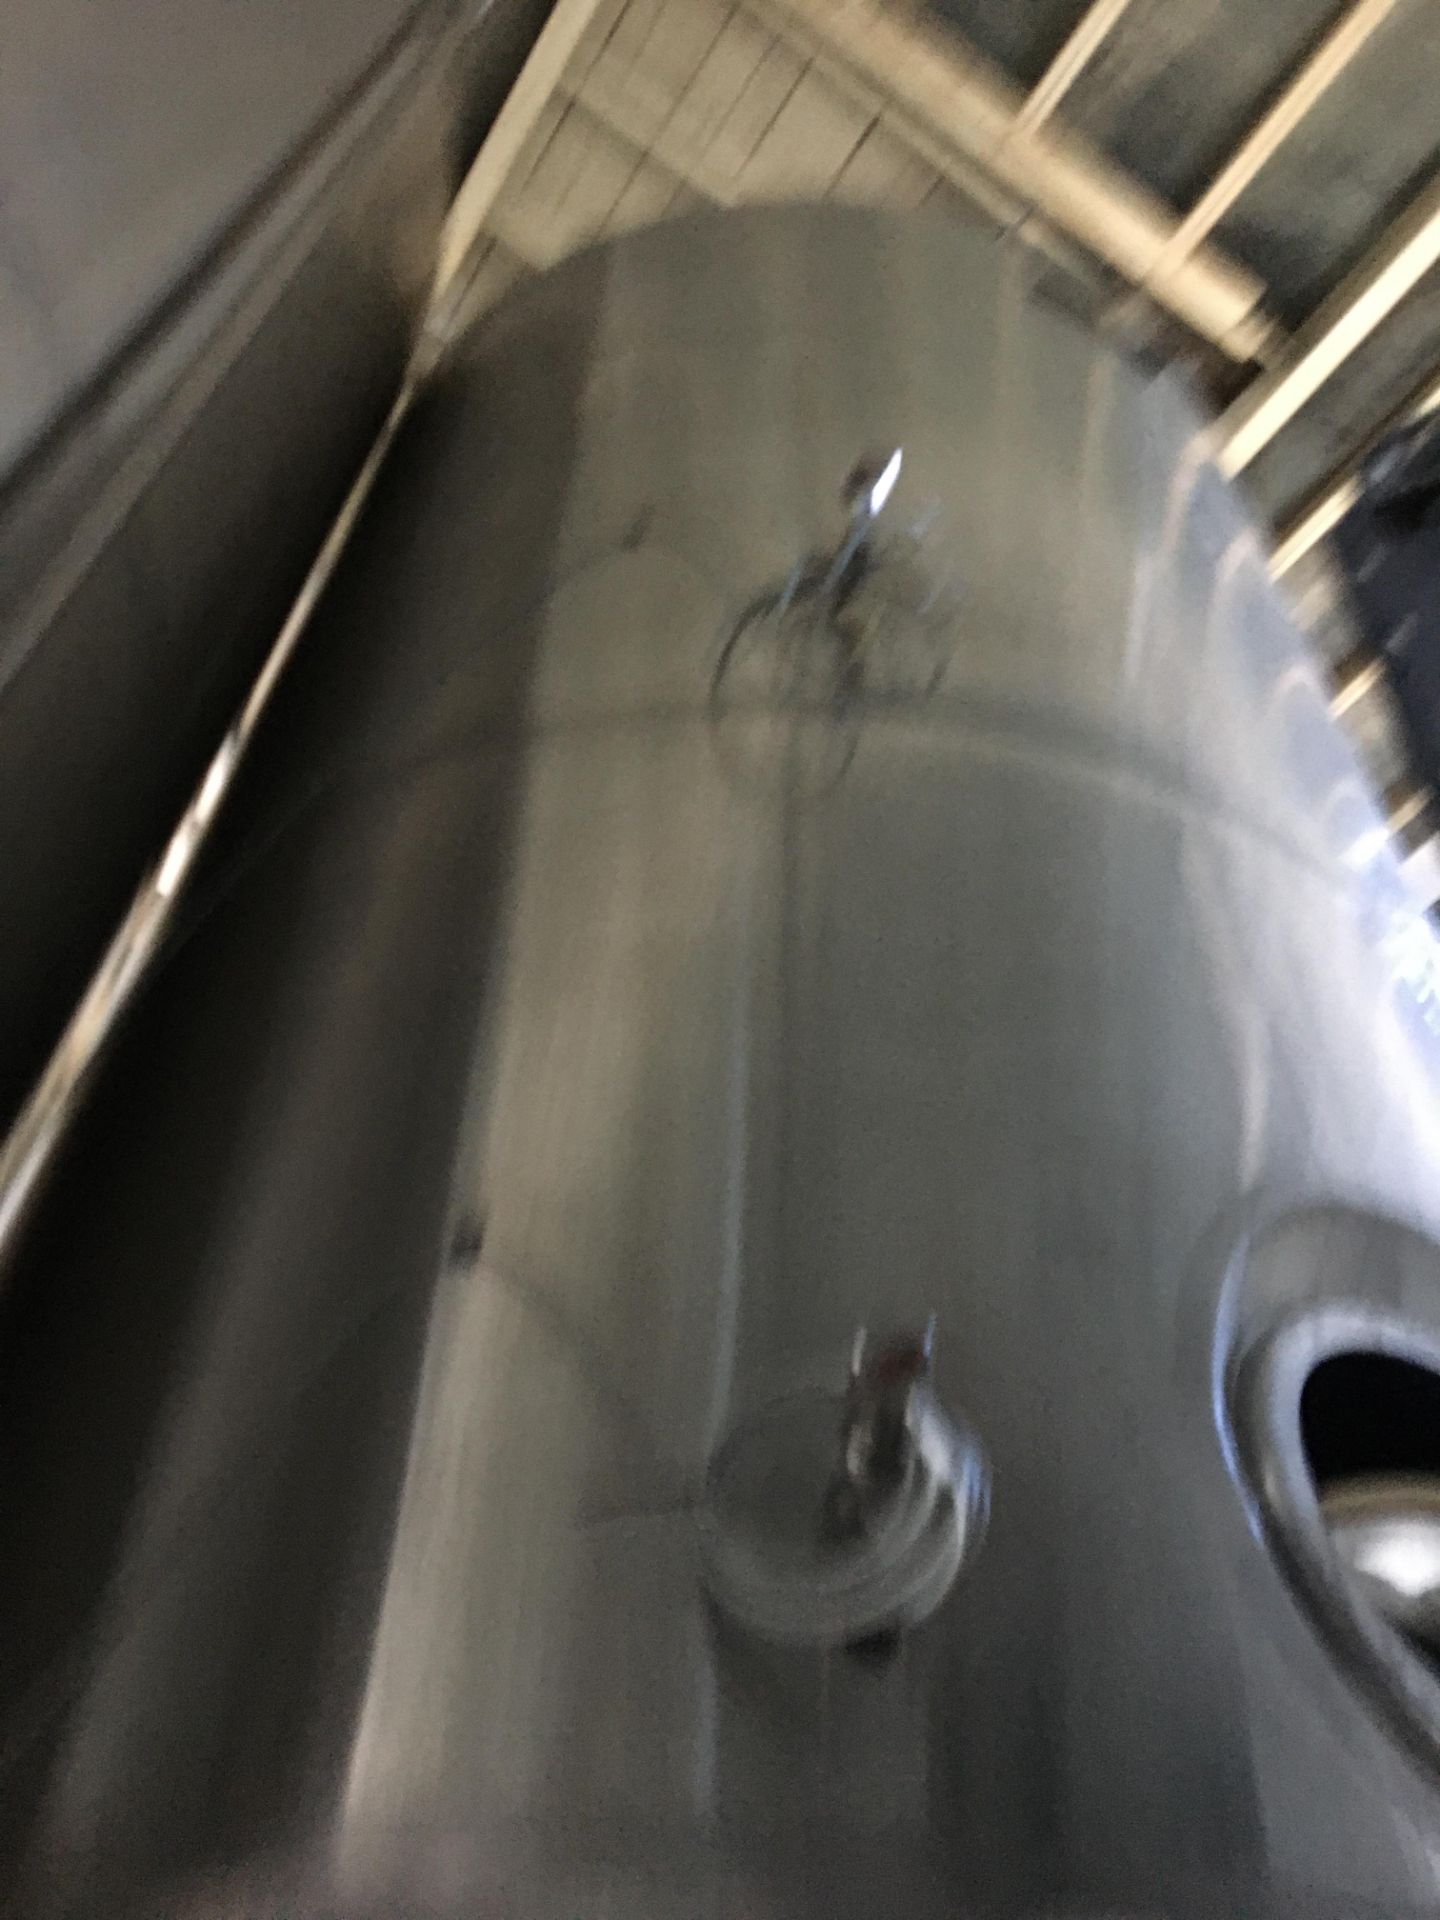 80-BBL Minnetonka Fermentation Tank, Model 80-BBL, Year 2017, Stainless Steel; Vessel store wort and - Image 9 of 14